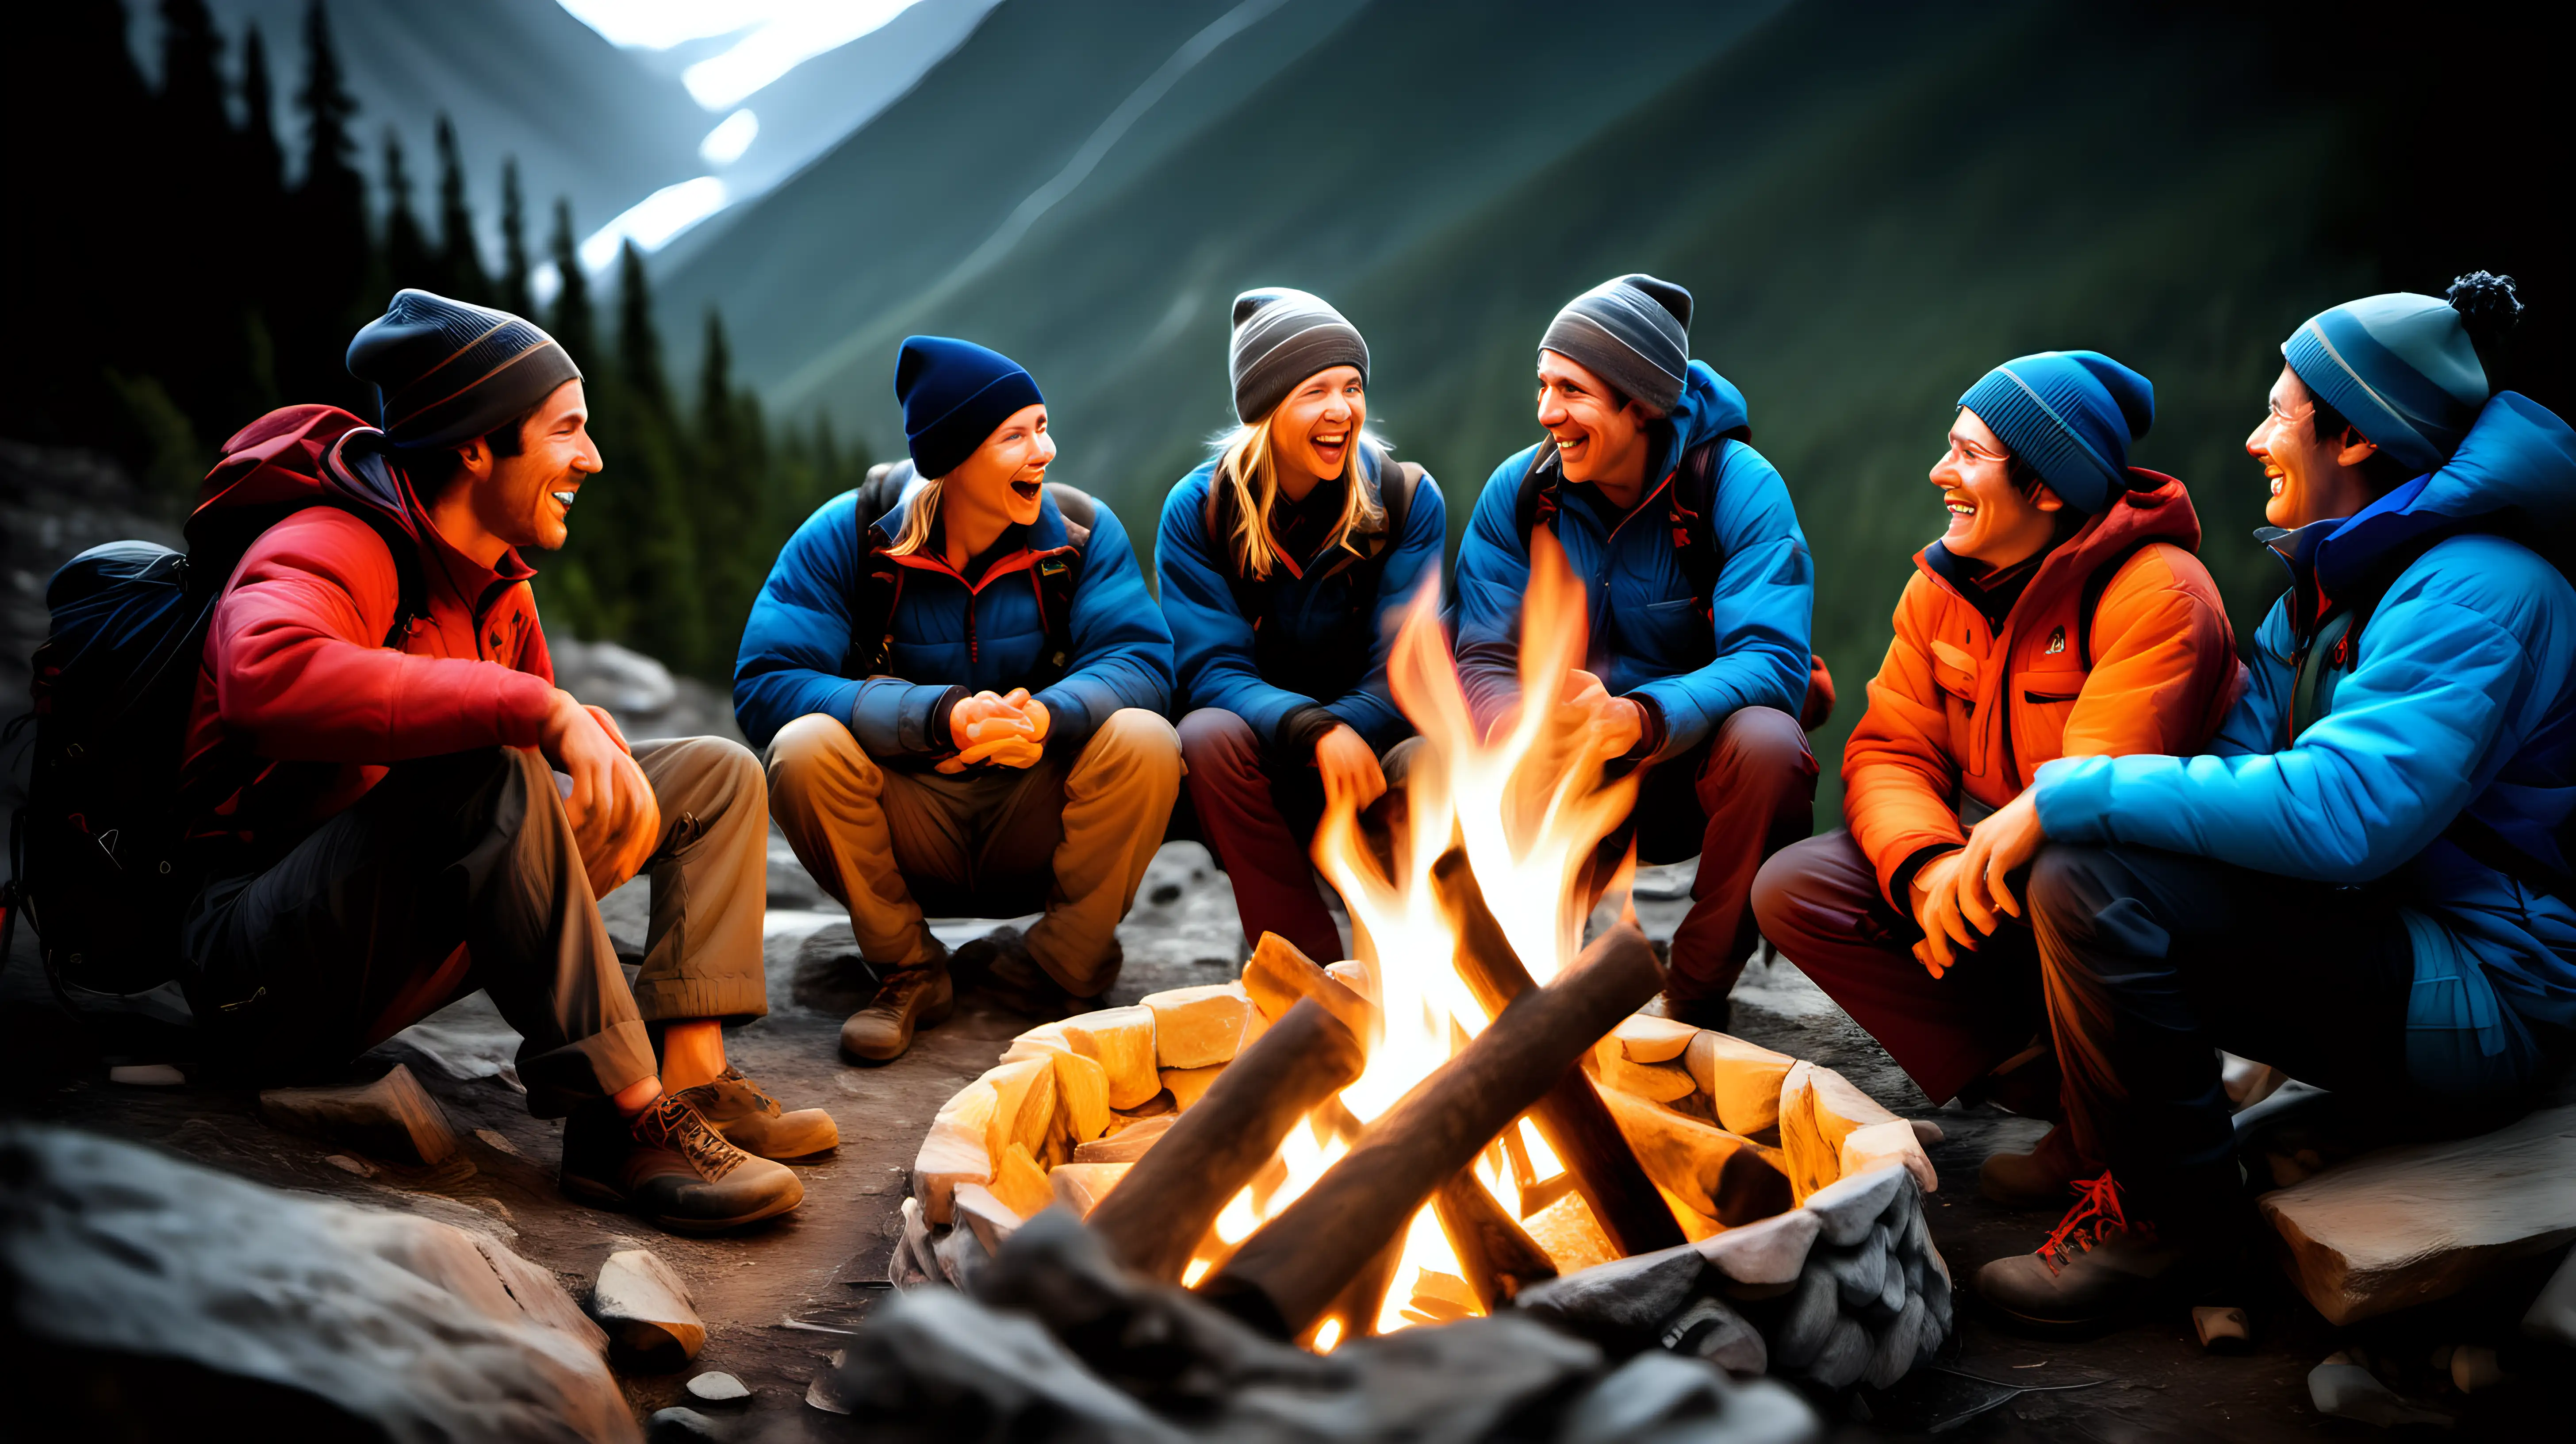 Climbers Unwind around Campfire Shared Stories and Laughter